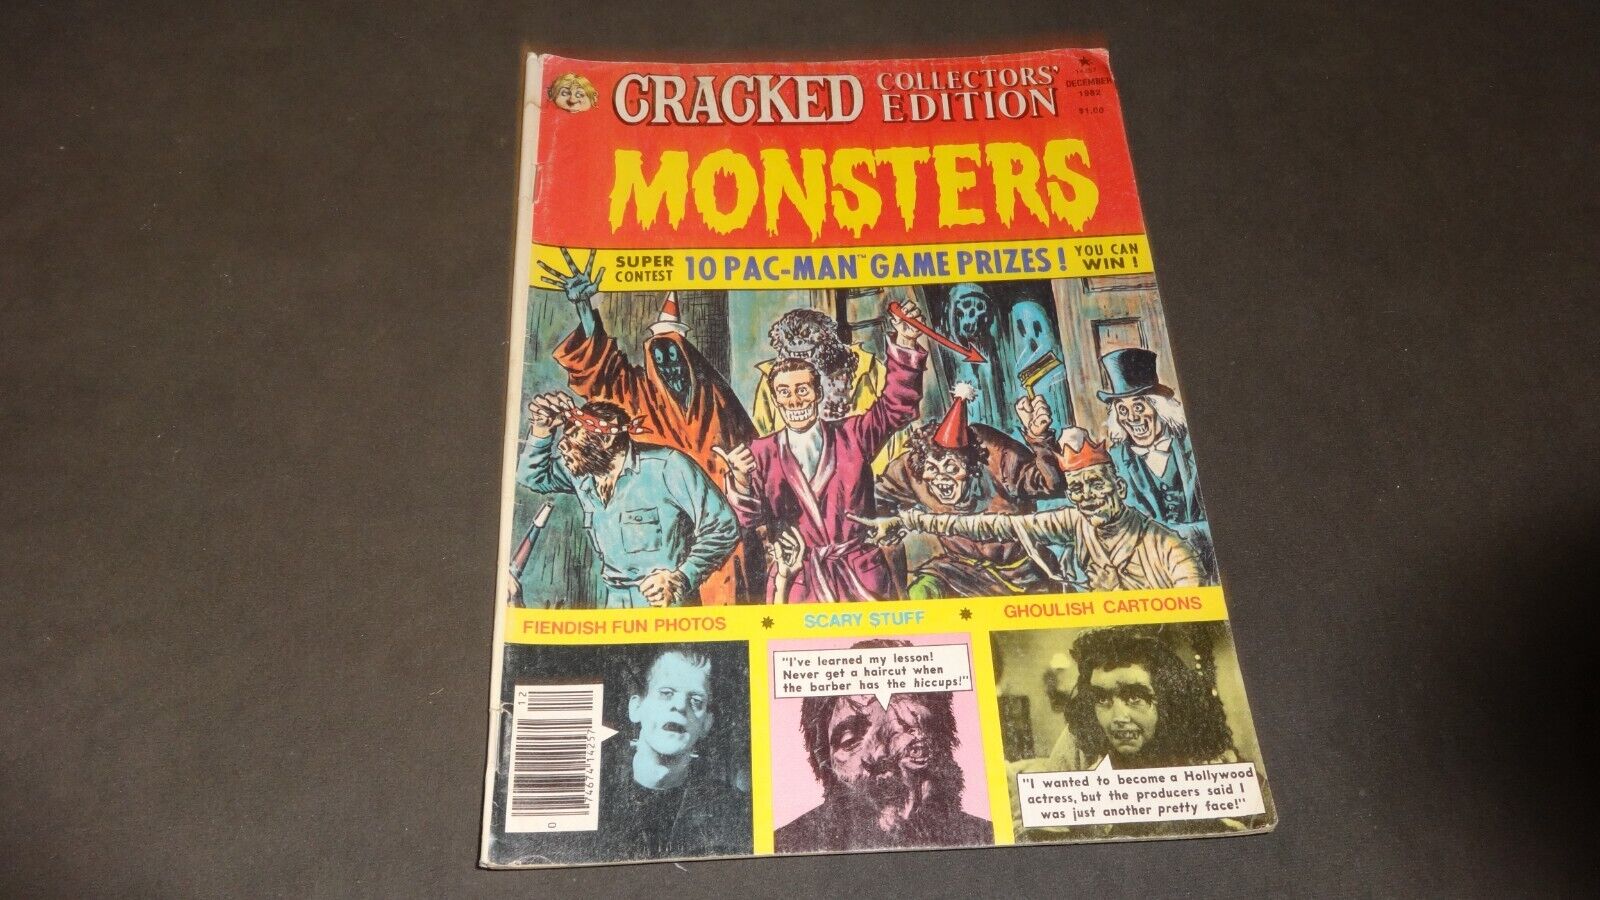 Cracked Collectors' Edition Monsters Dec 1982